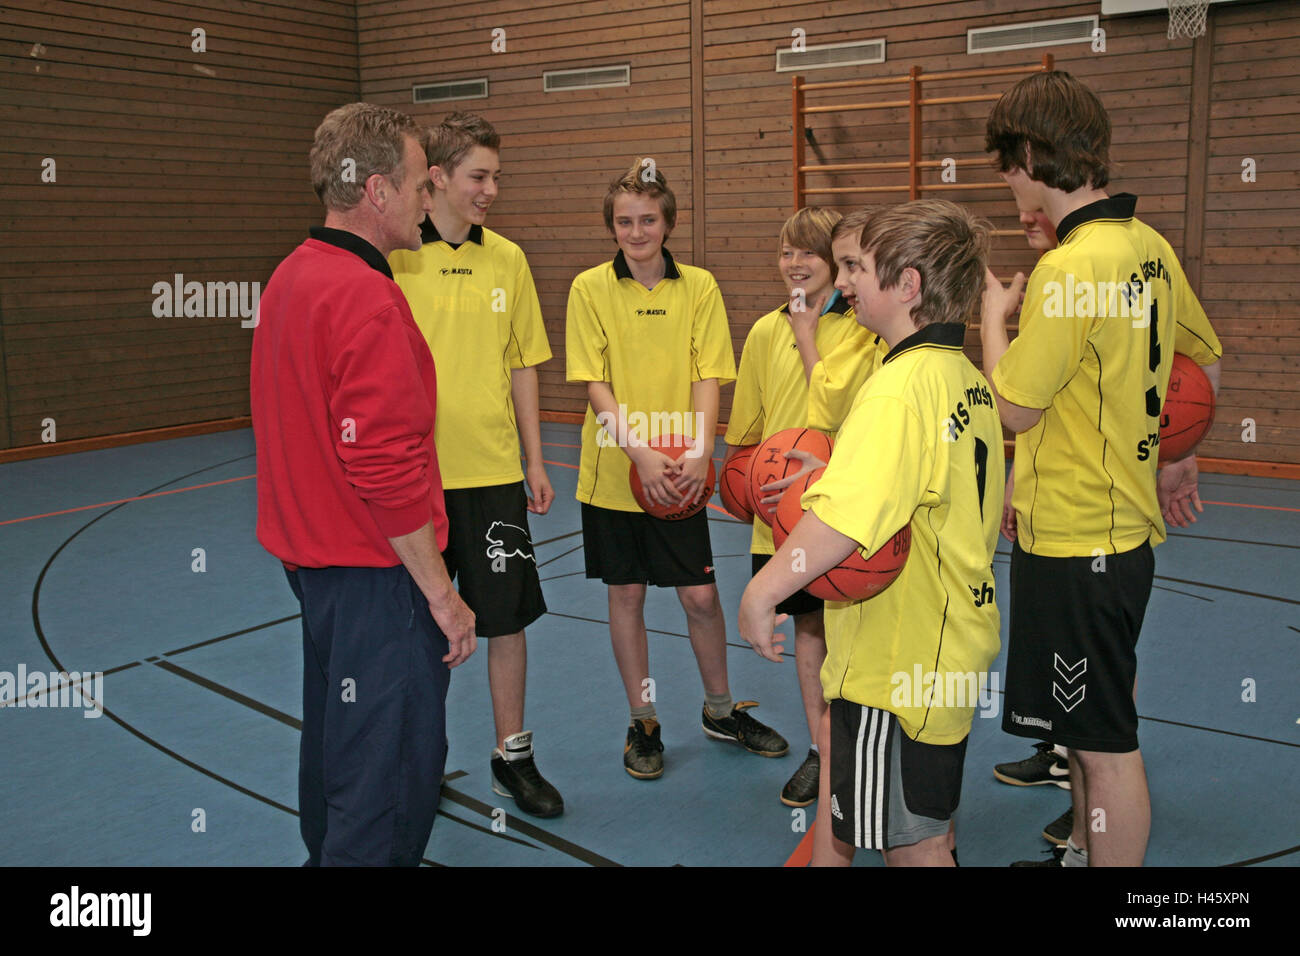 Gymnasium, school sport, boy, basketball, team, balls, hold, manager, discussion, model released, people, inside, school, seven, team, group, team's recording, basketball, team's jerseys, youth, sport, school sport, team, training, condition, motion, perseverance, sports club, togetherness, social behaviour, fairness, team sport, sport, ball game, man, teacher, Stock Photo